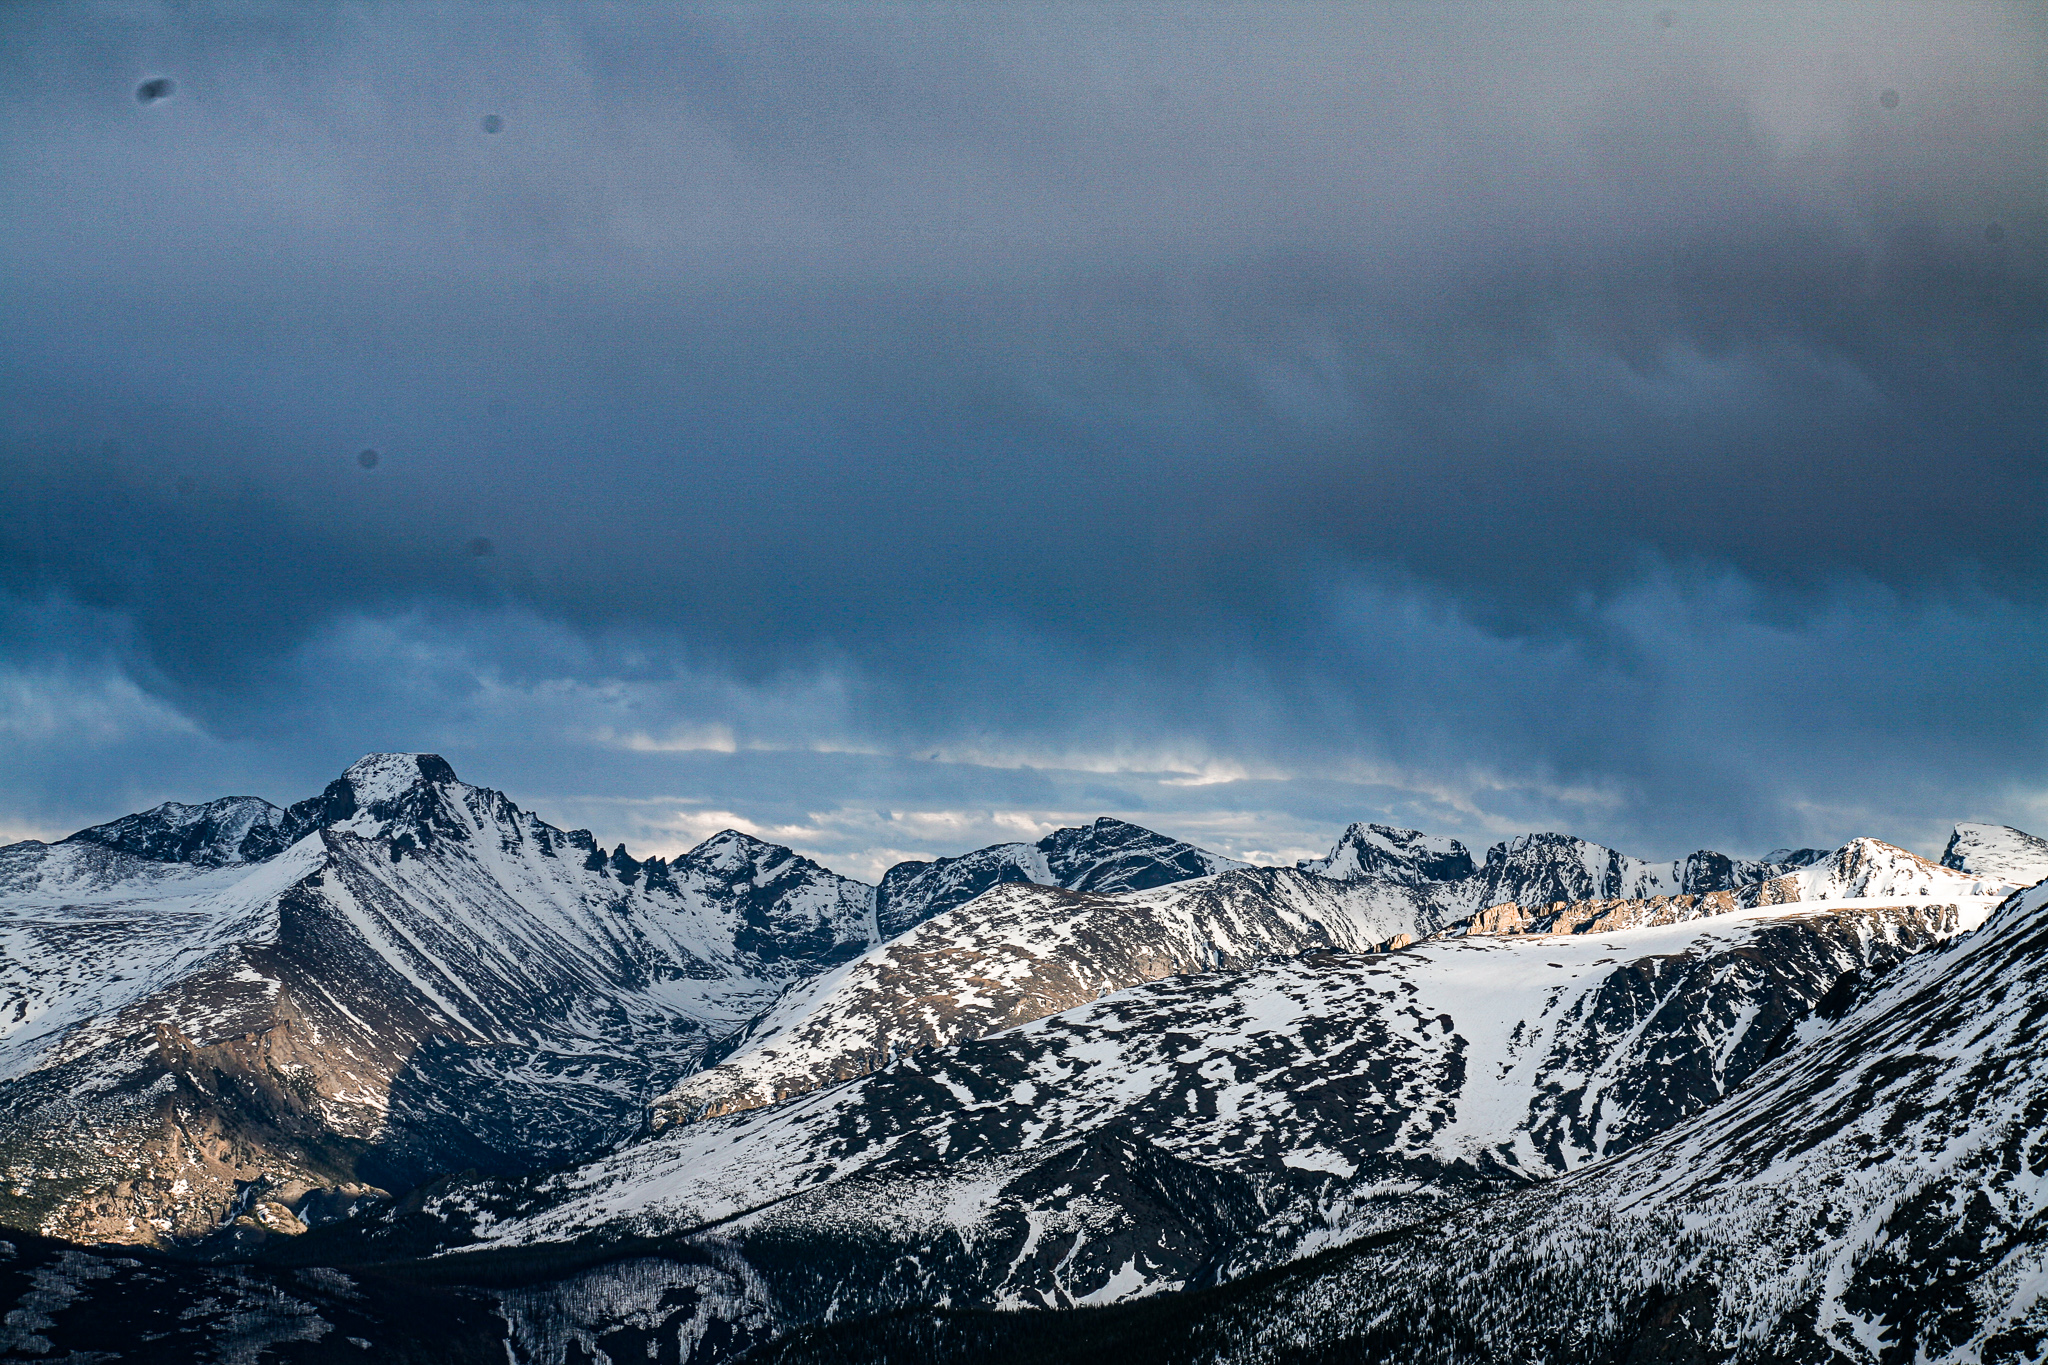 Pictures of Rocky Mountains' peaks.